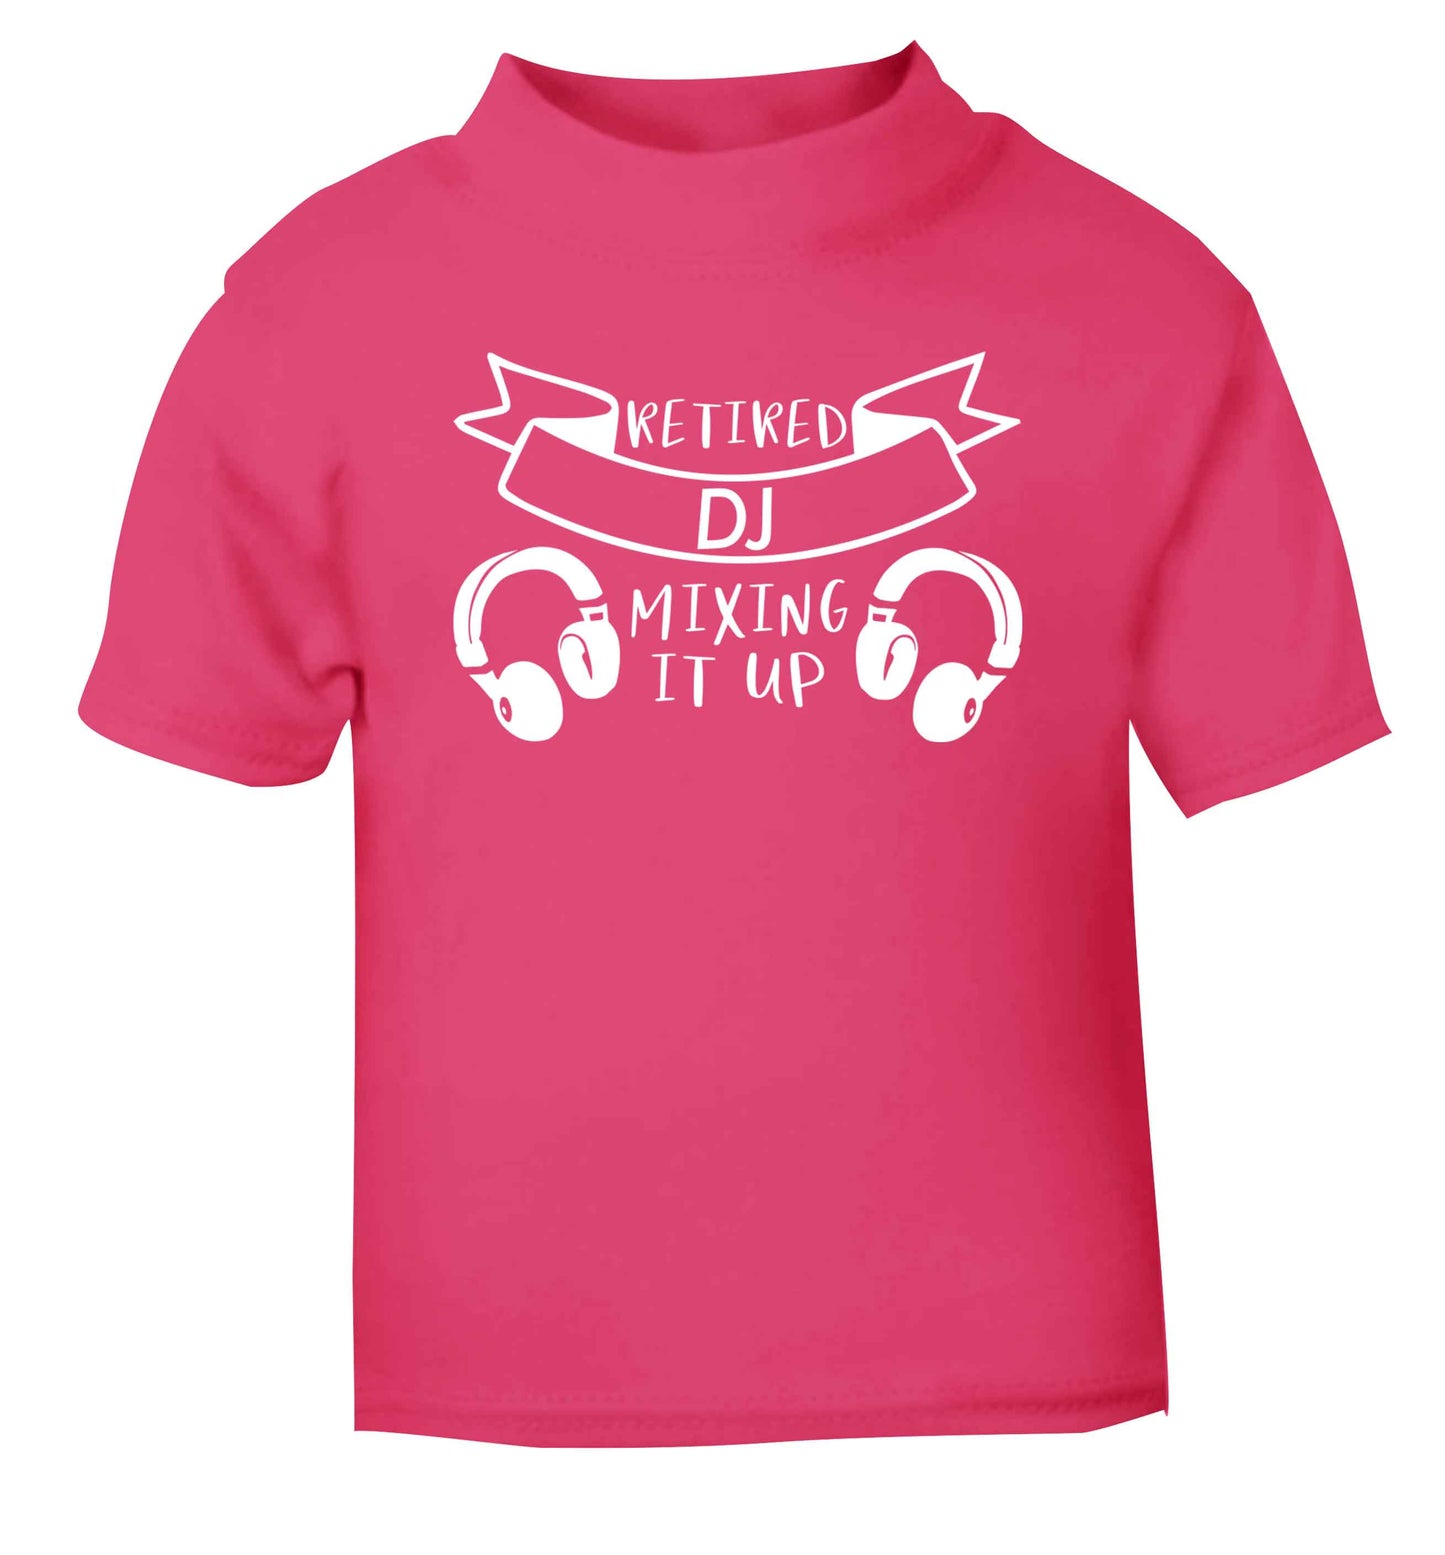 Retired DJ mixing it up pink Baby Toddler Tshirt 2 Years